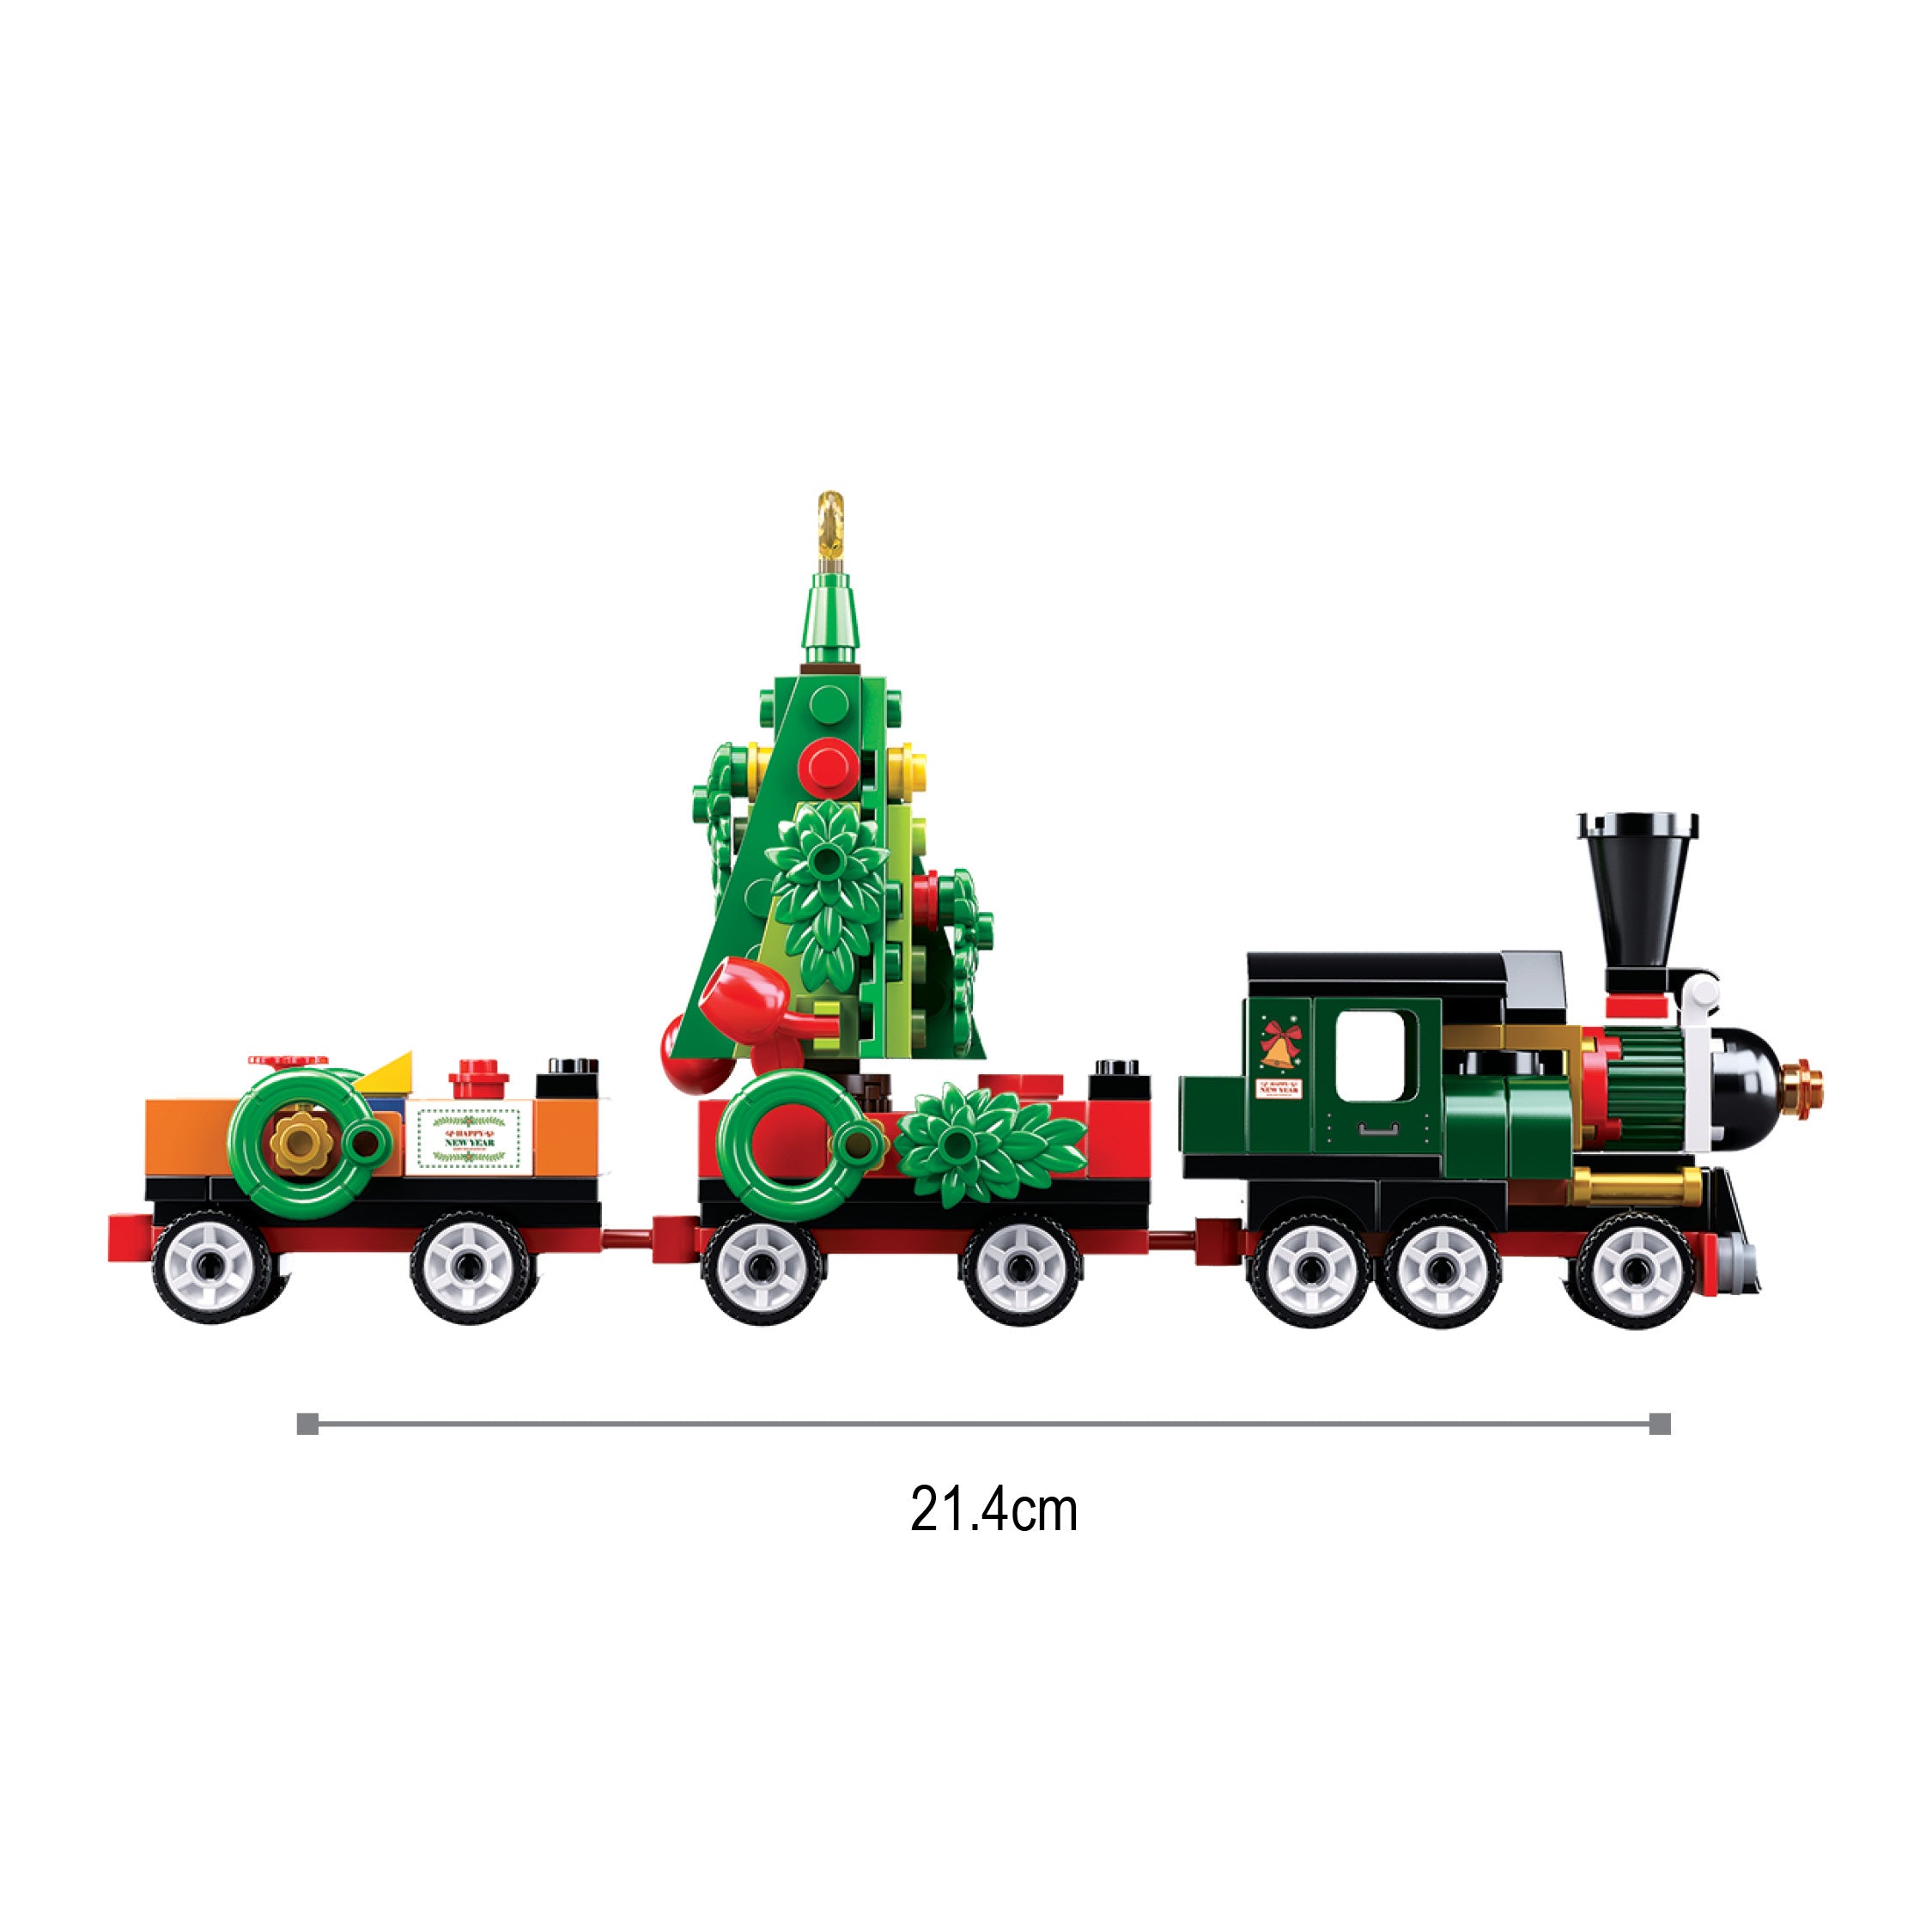 Sluban® New Year (M38-B0887) (565 Pieces) Building Blocks Kit For Boys Aged 6 Years And Above Creative Construction Set Educational Stem Toy, Ideal For Gifting Birthday Gift Return Gift, Blocks Compatible With Other Leading Brands, Bis Certified.